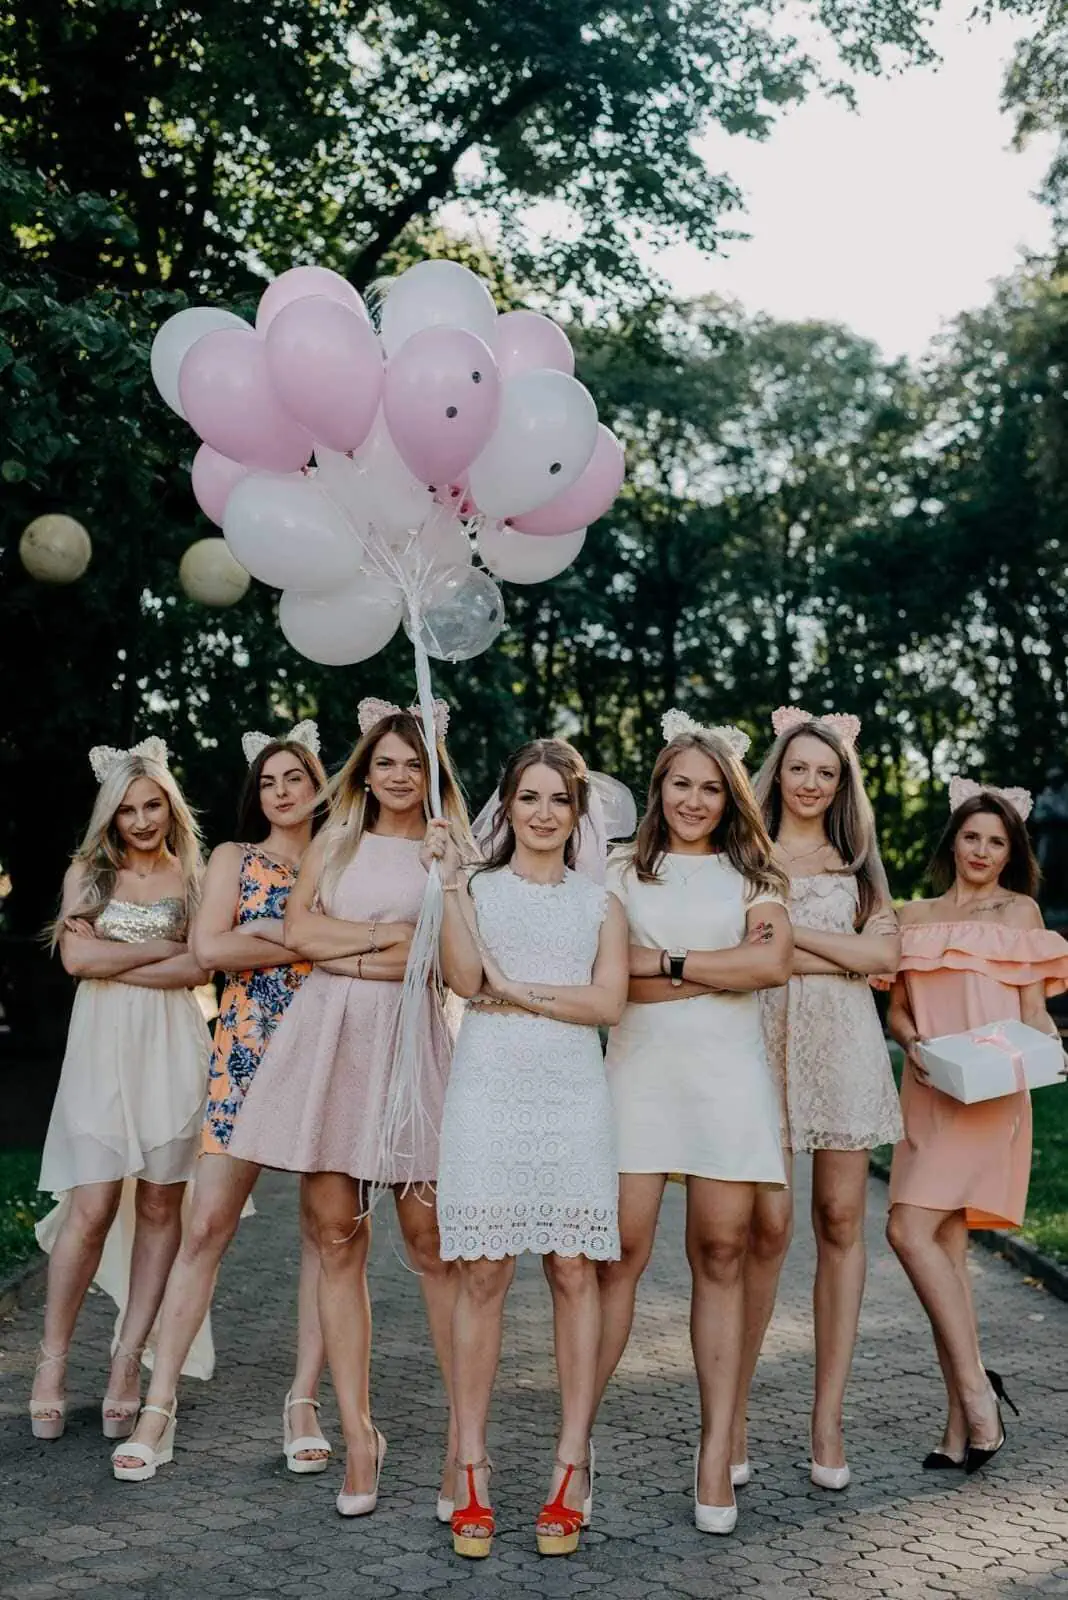 5 Reasons You Should Hire a Limo for Your Bachelorette Party